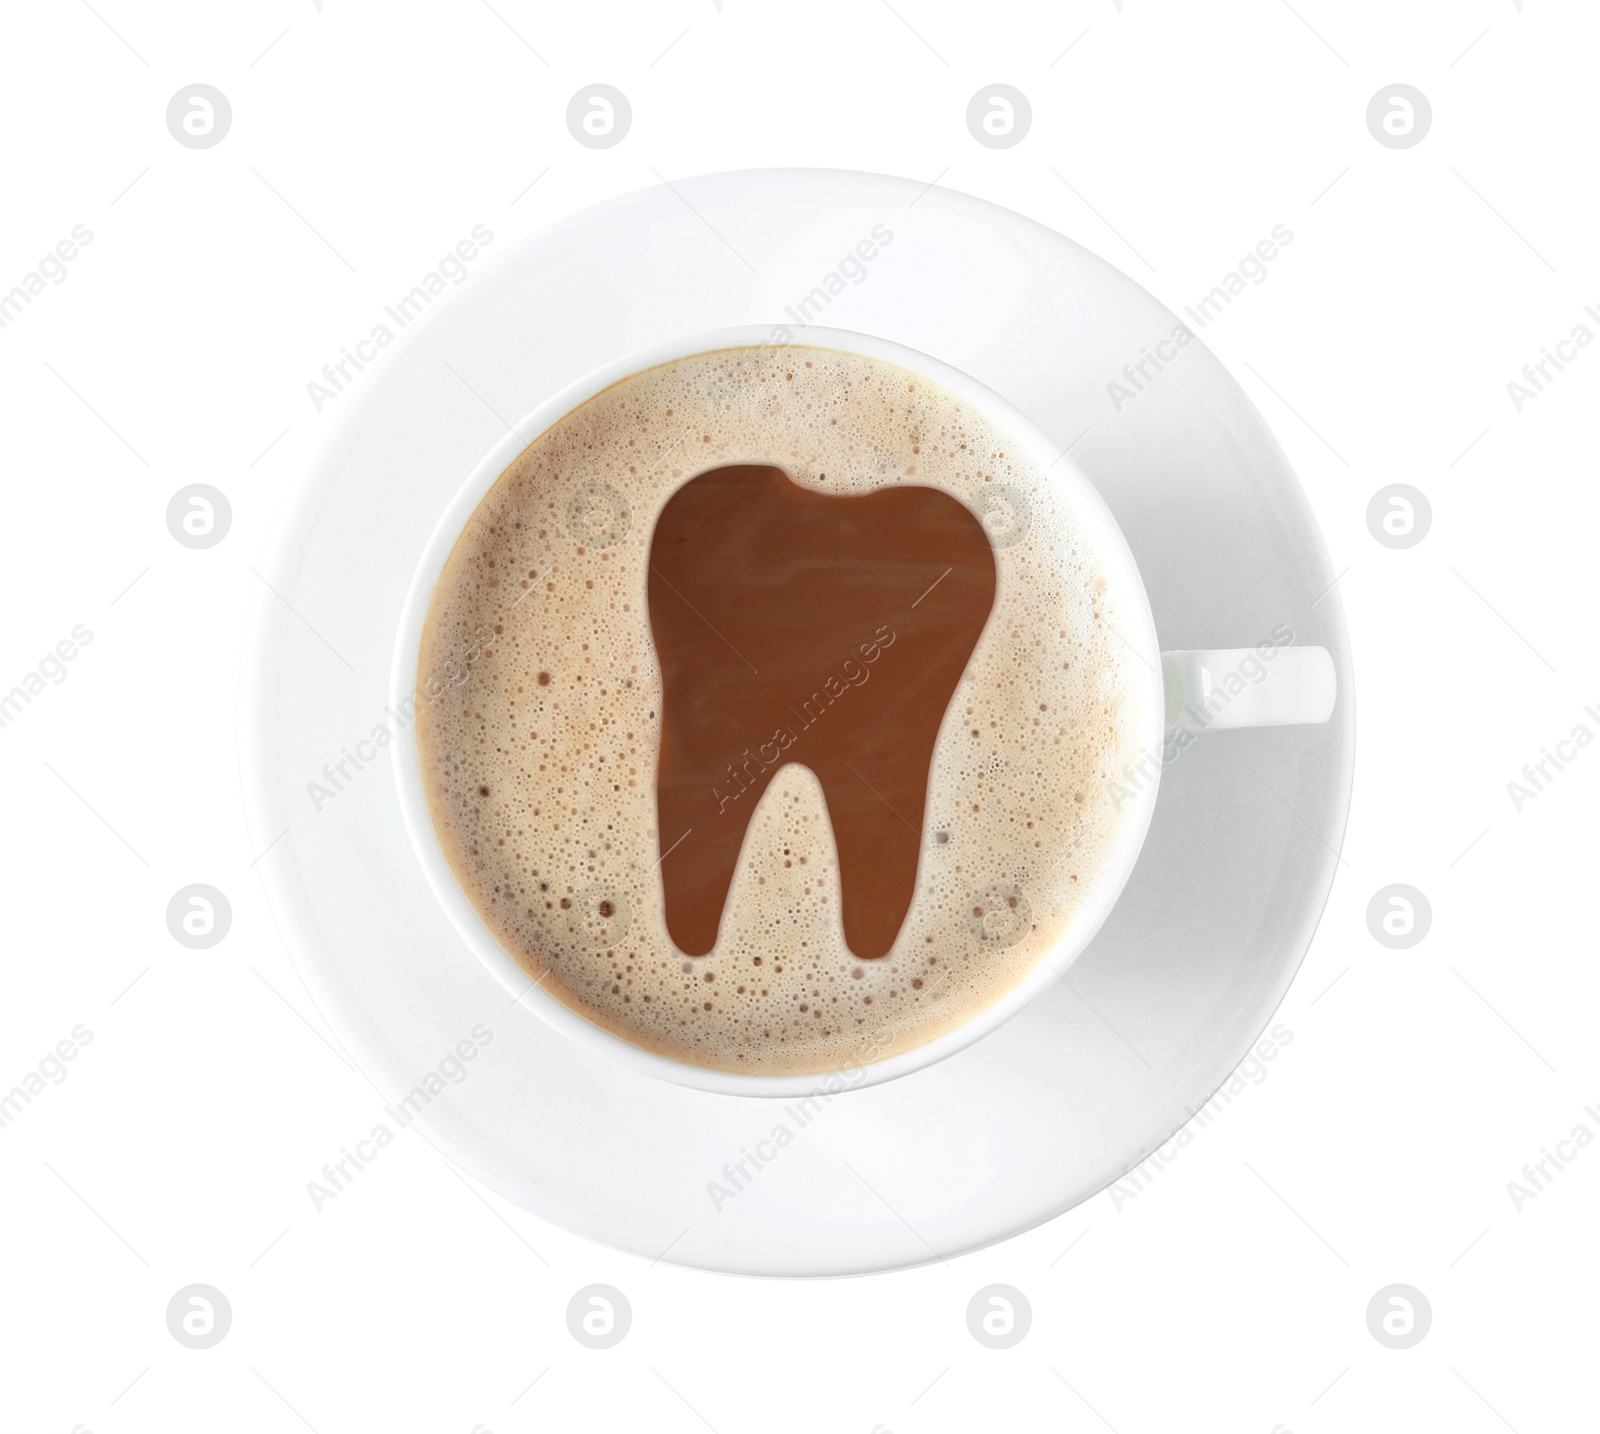 Image of Coffee causing dental problem. Cup of hot drink on white background, top view